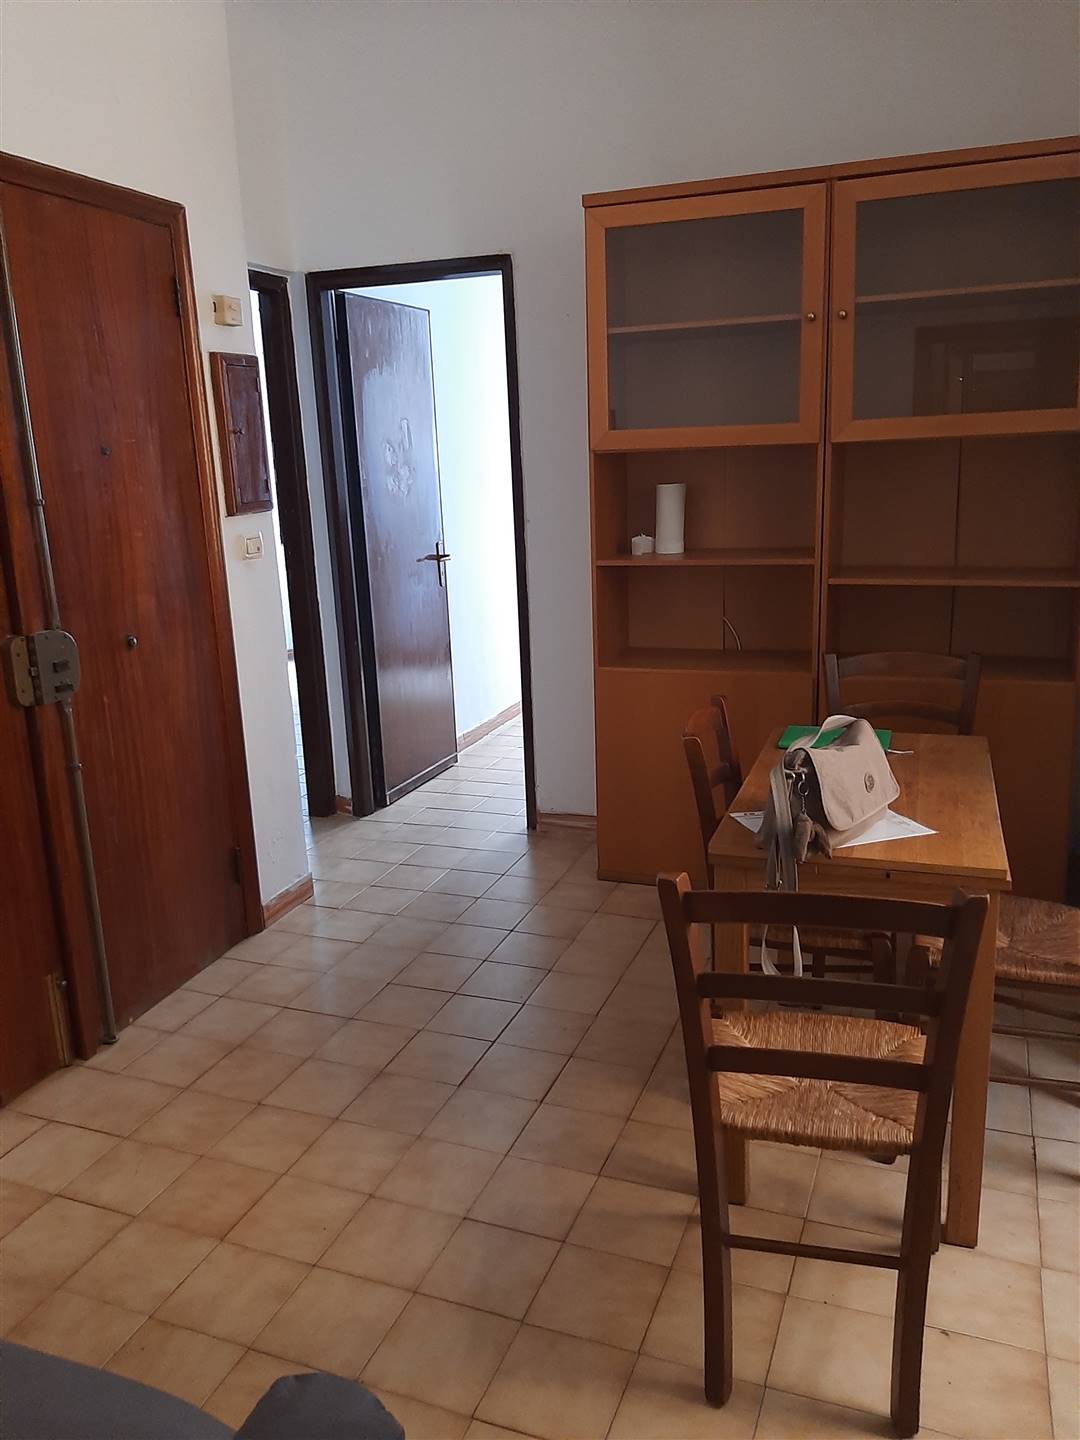 VILLAPIANA, SAVONA, Apartment for sale of 55 Sq. mt., Good condition, Heating Individual heating system, Energetic class: G, placed at 1° on 3, 